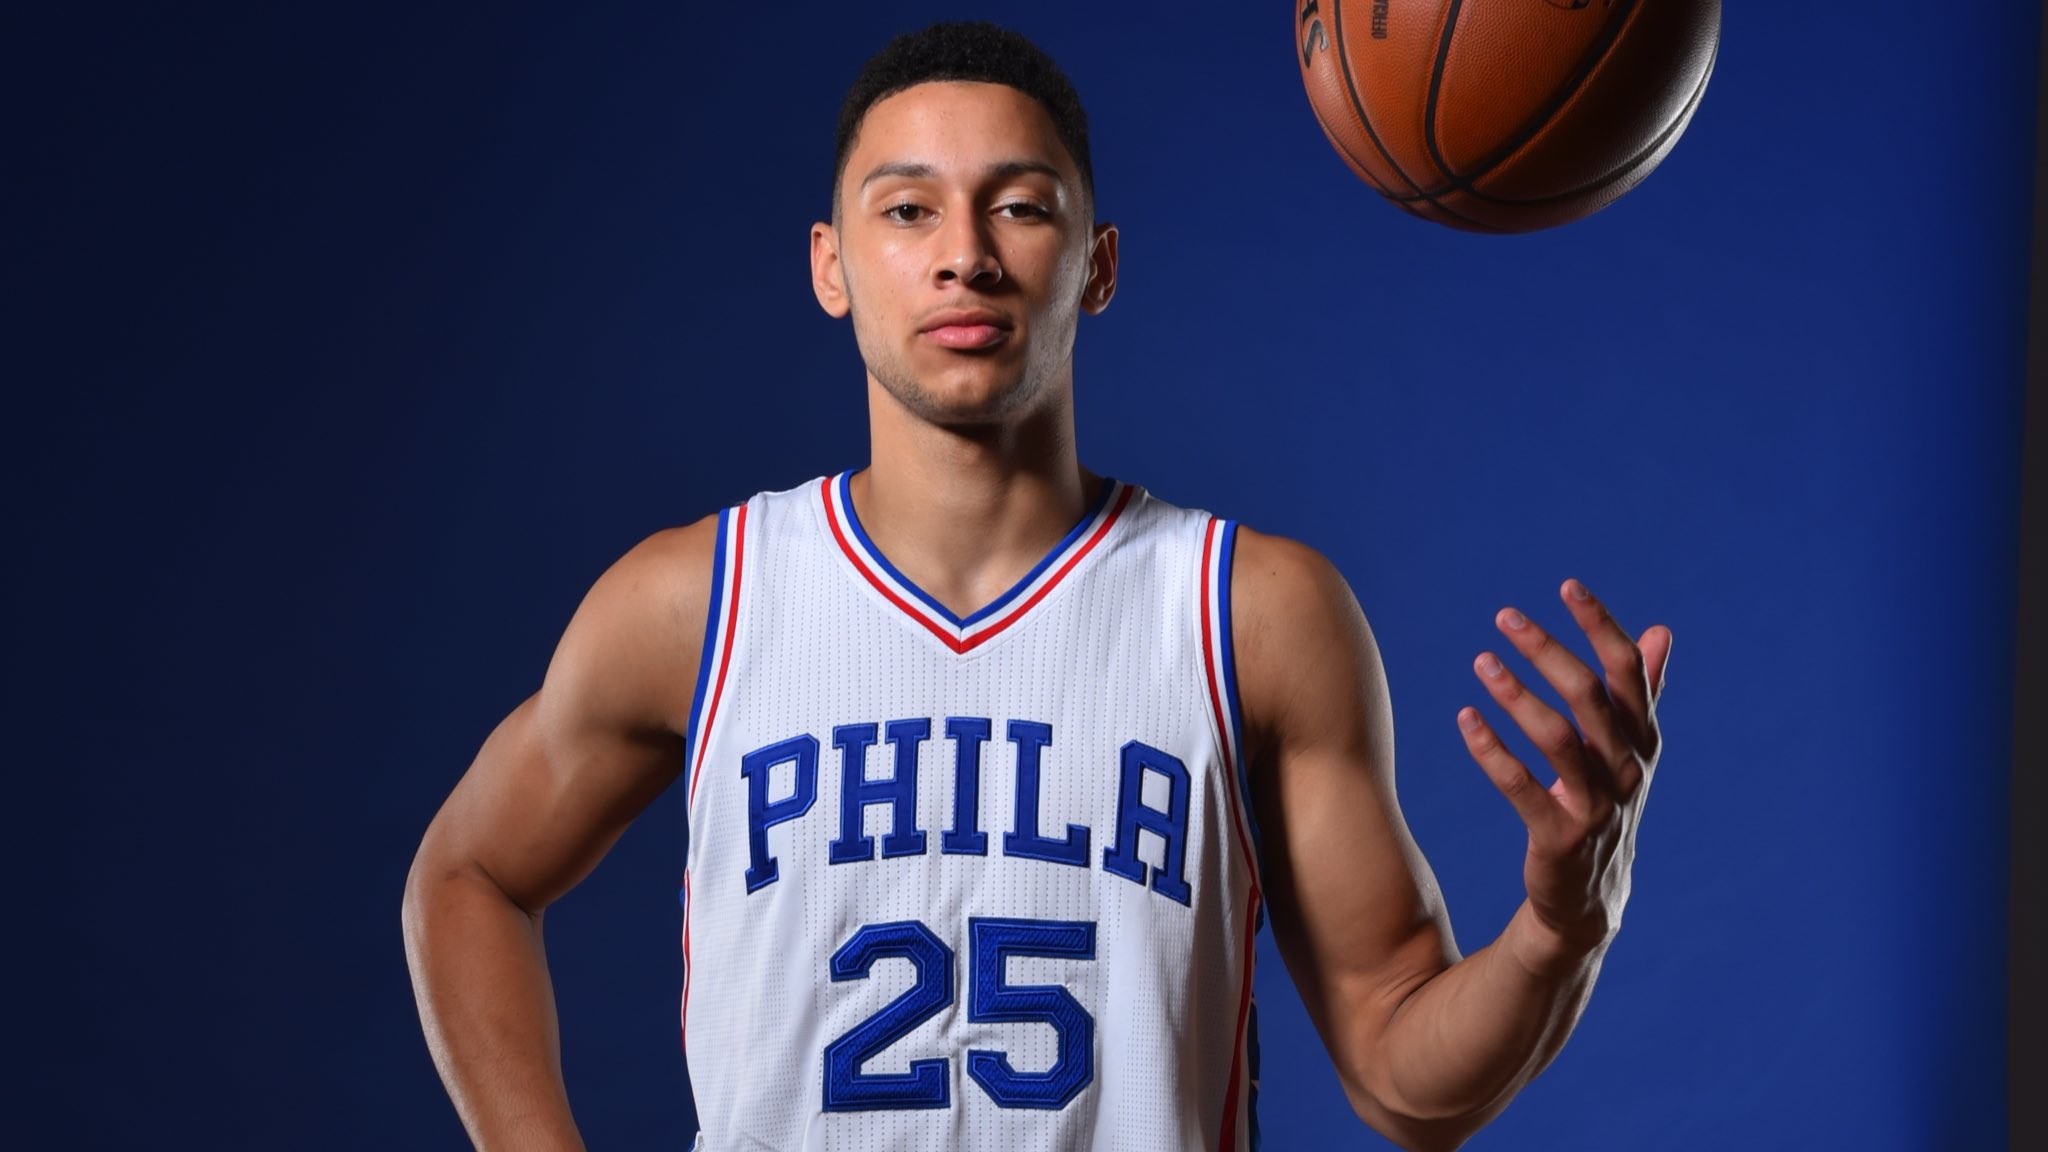 2048x1152 Ben Simmons for Paul George: Do You Do the Deal?